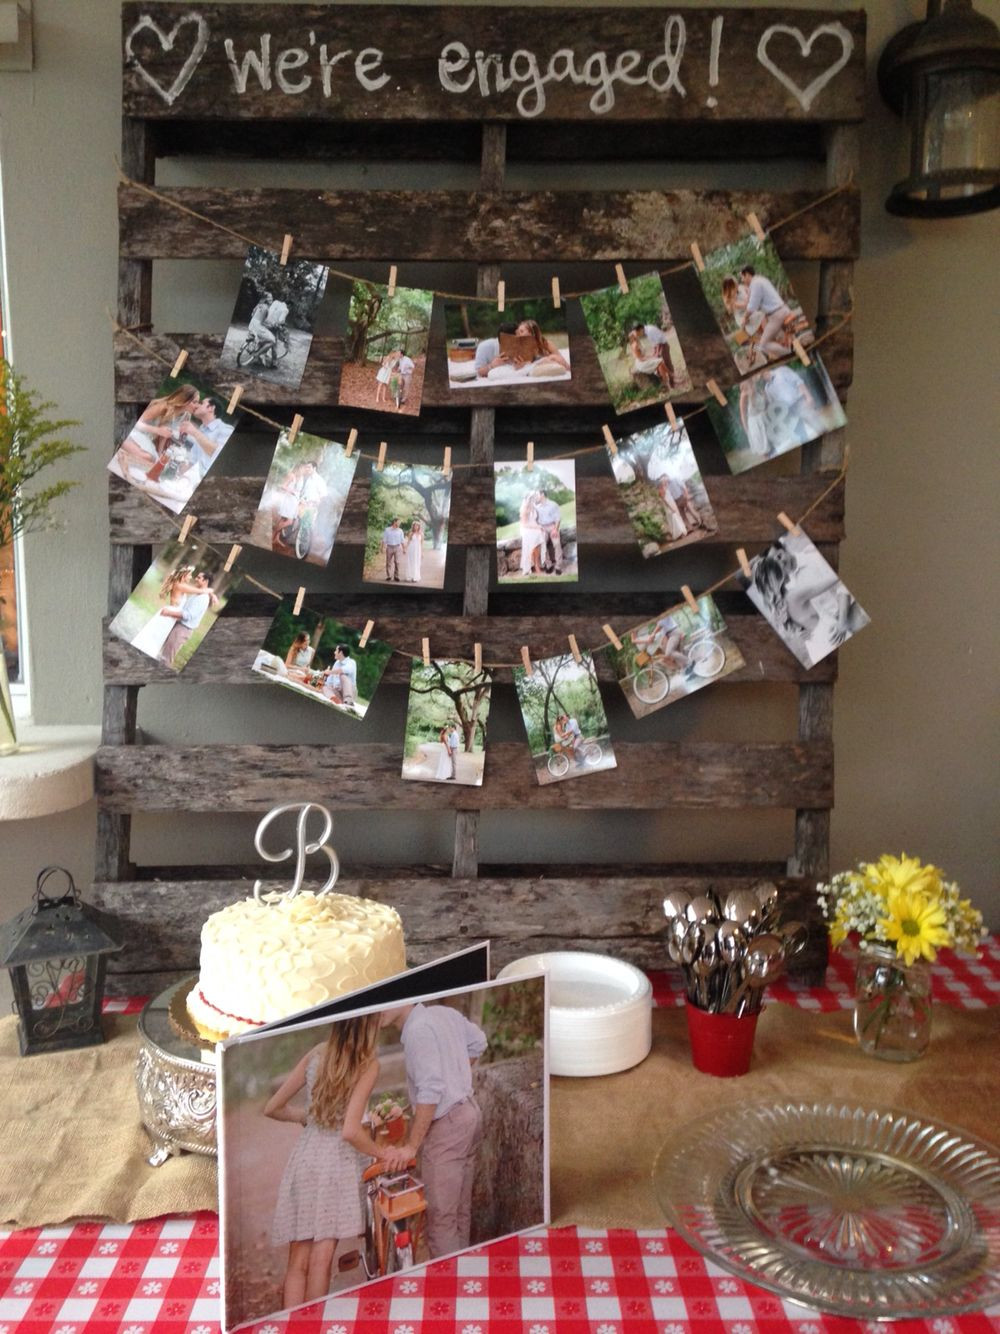 Engagement Party Ideas At Home
 I do BBQ … Engagement